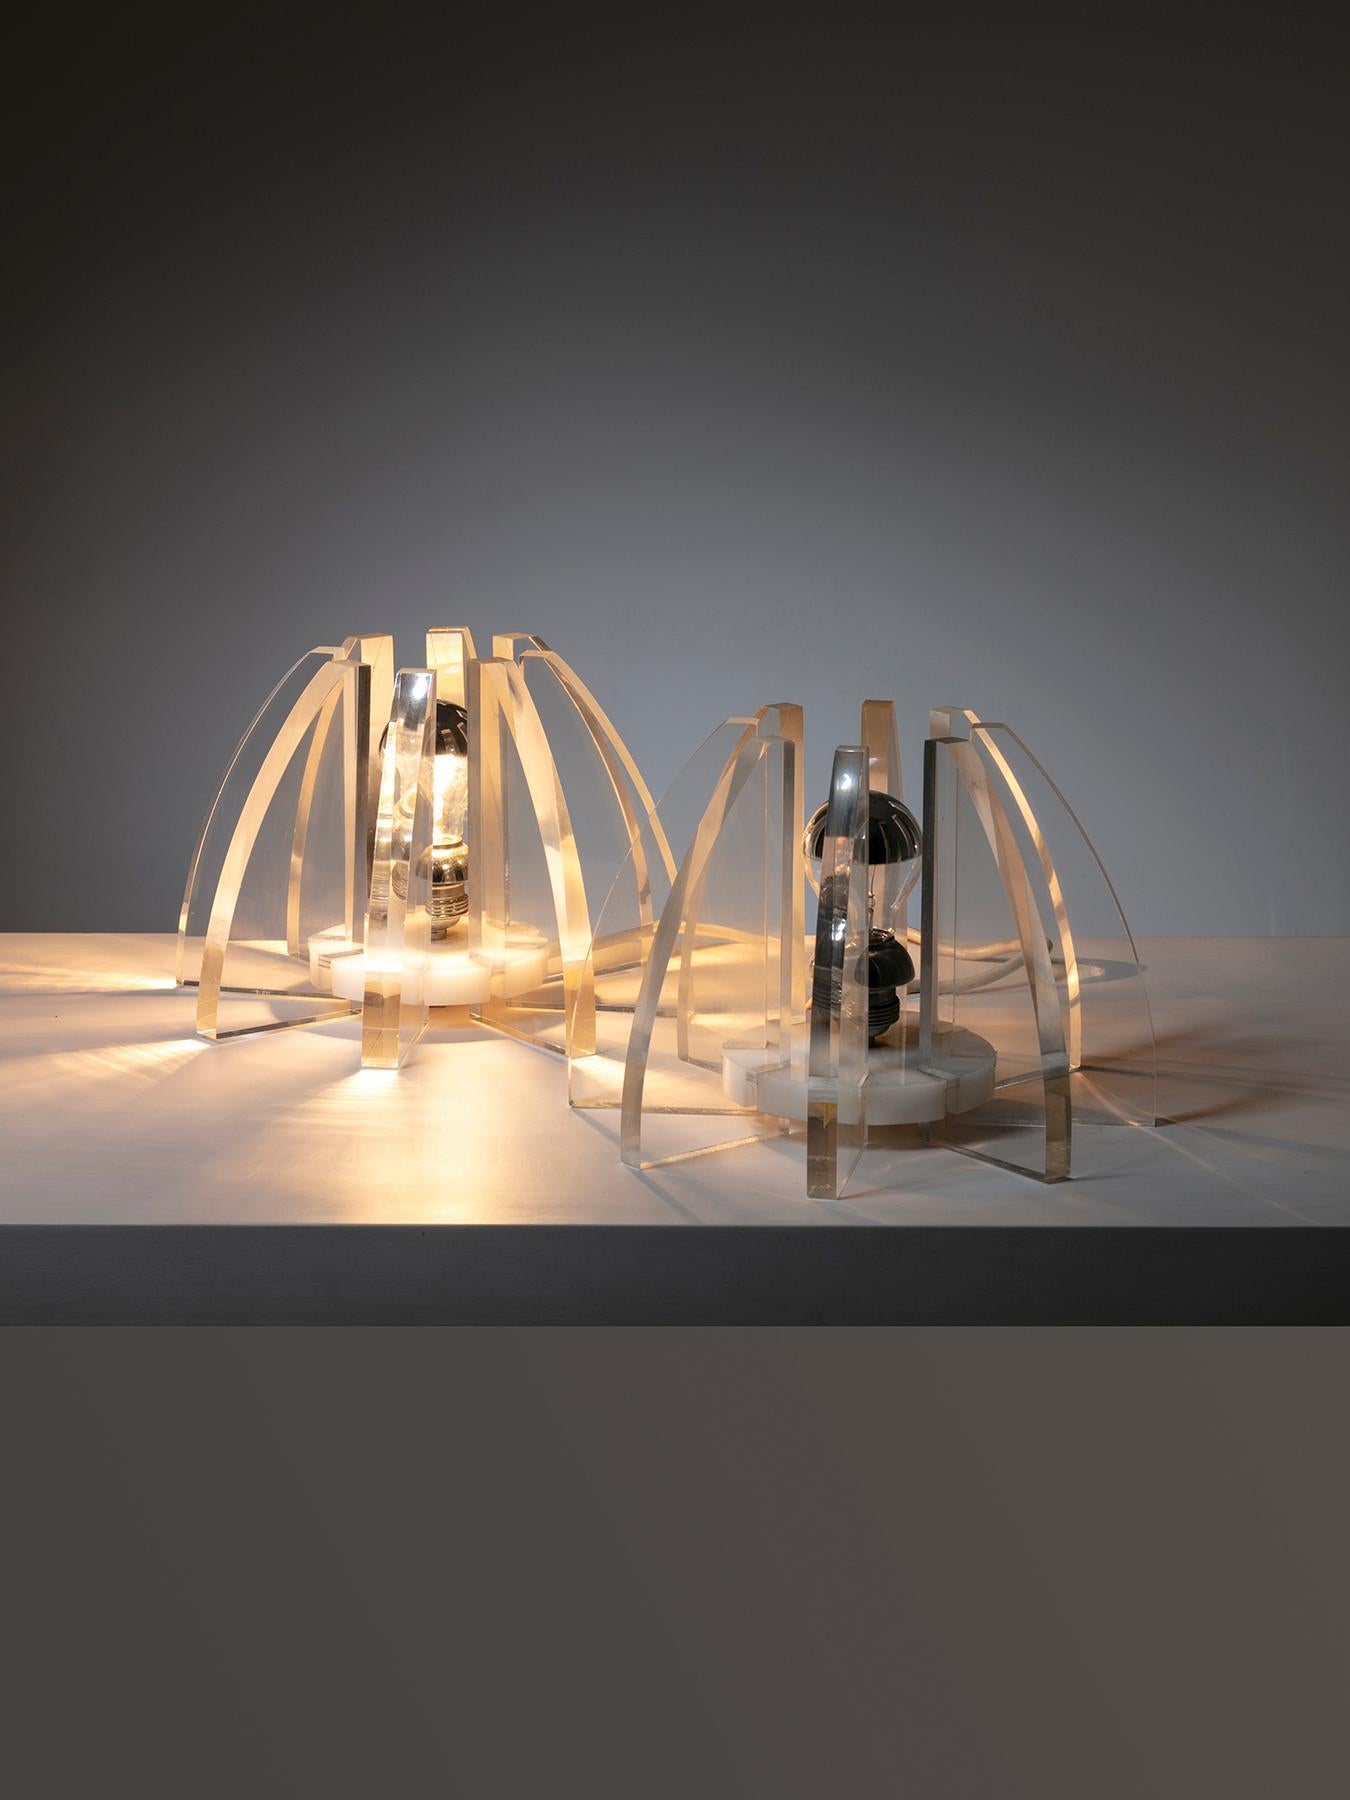 Rare set of two table lamps with plexiglass leaves.
Blossoming lights with delicate proportions.